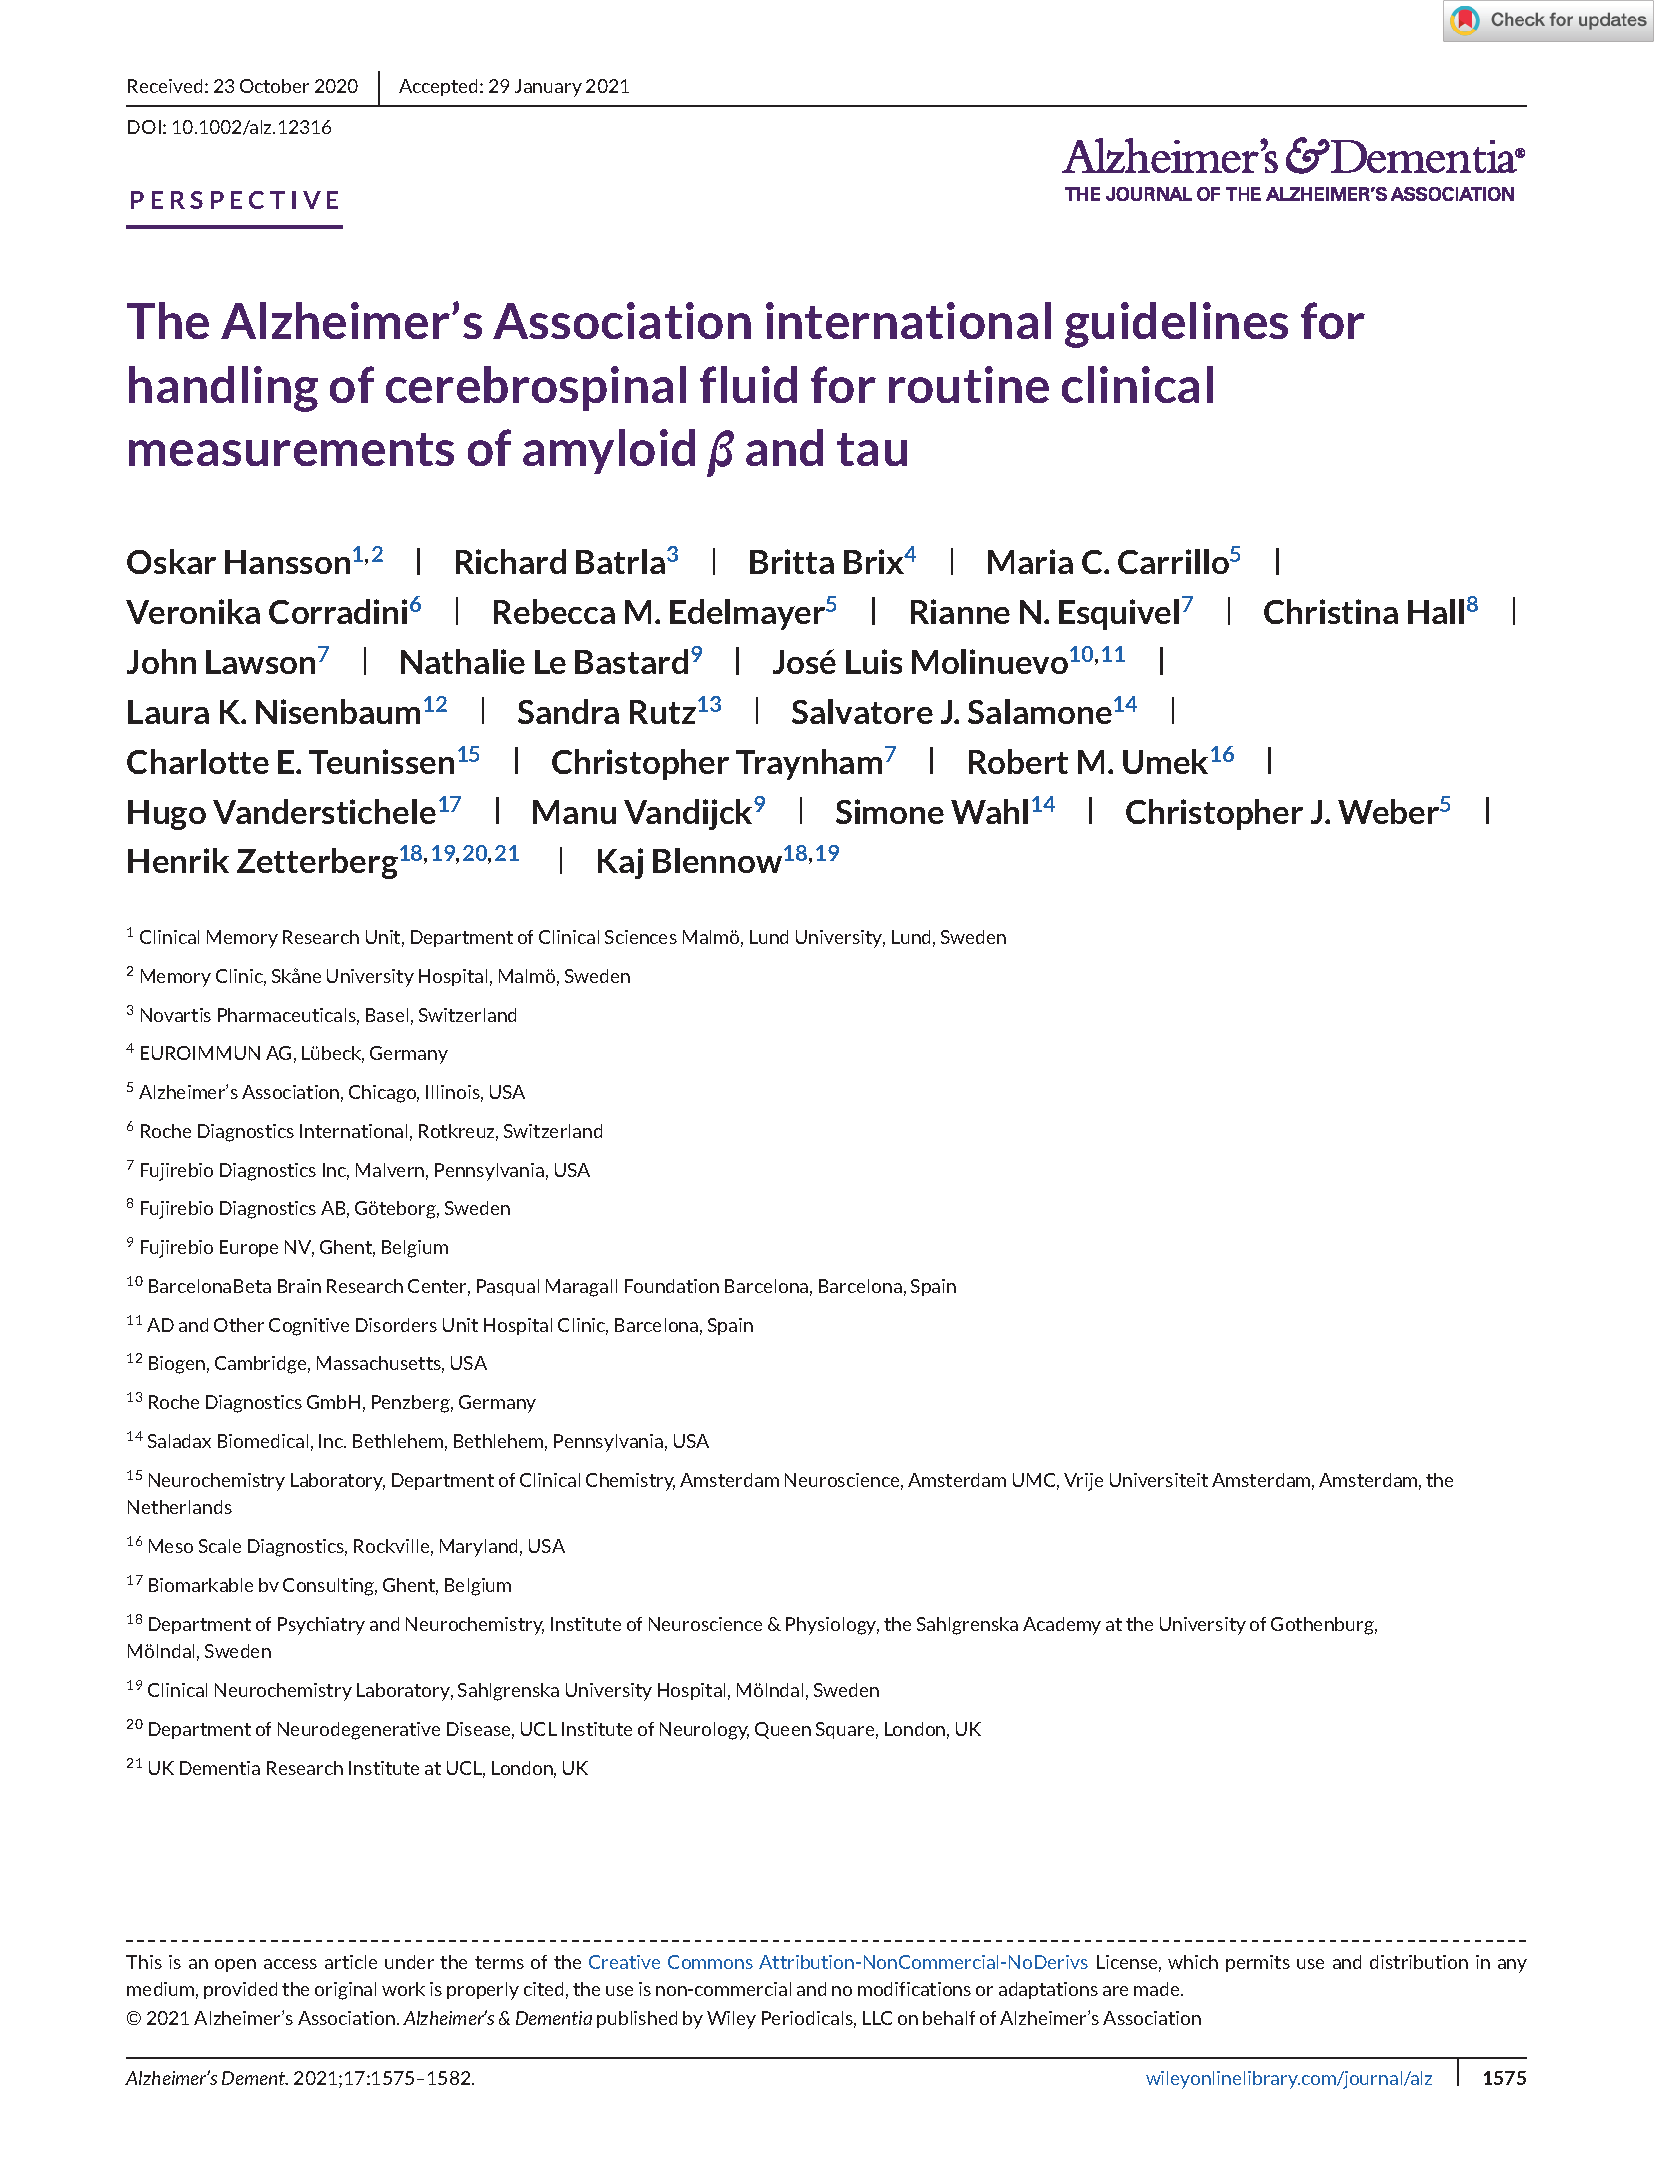 The Alzheimer's Association international guidelines for handling of cerebrospinal fluid for routine clinical measurements of amyloid beta and tau